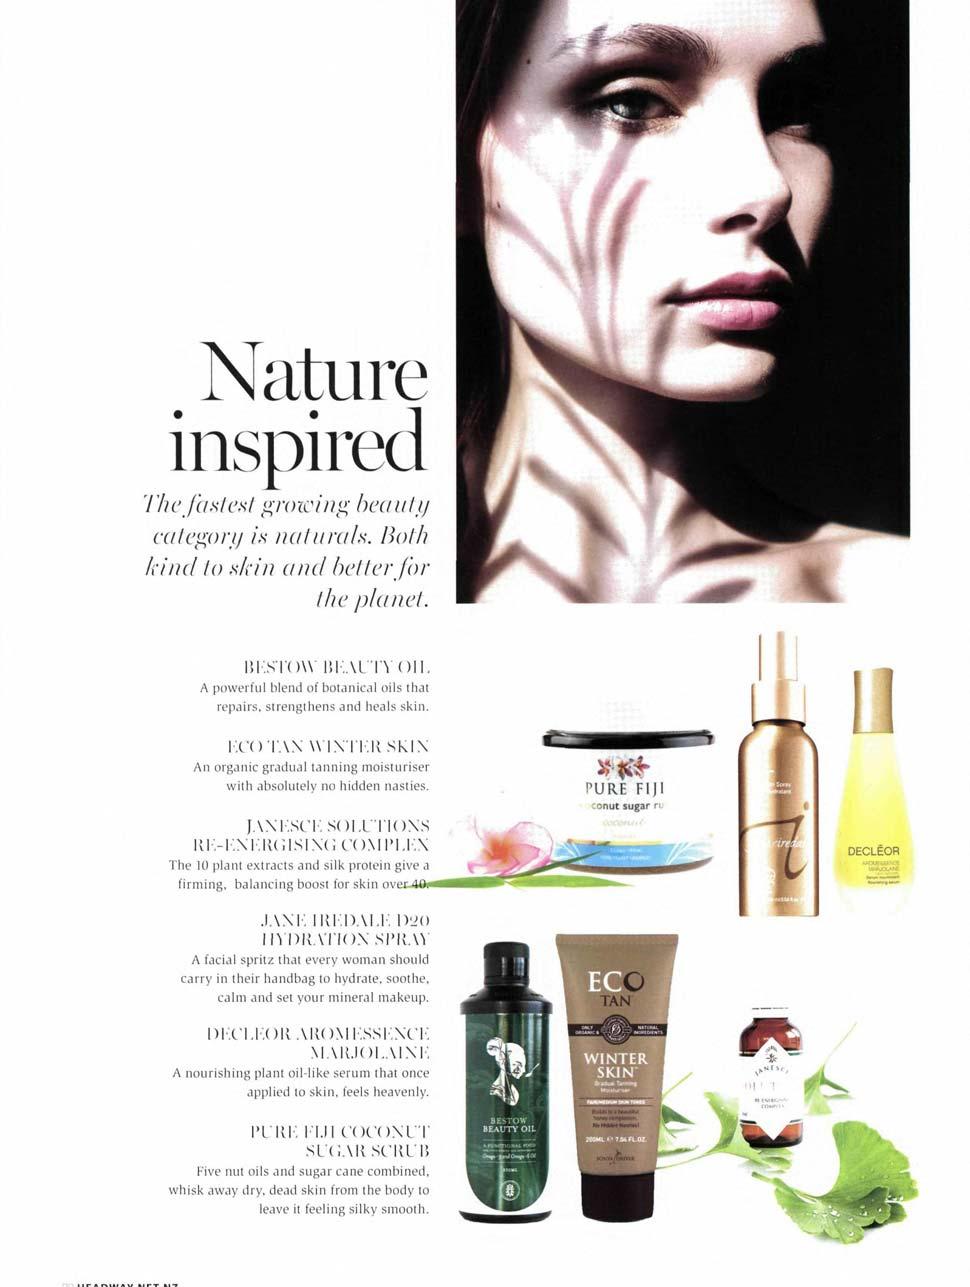 ID 669574625 BRIEF MEDIAJ(W INDEX 1 PAGE 5 of 8 Nature inspired The fastest growing beauty category is naturals. Both kind to skin and better for I lie planet. lil.s I ()\\ l'.kaltyoii.